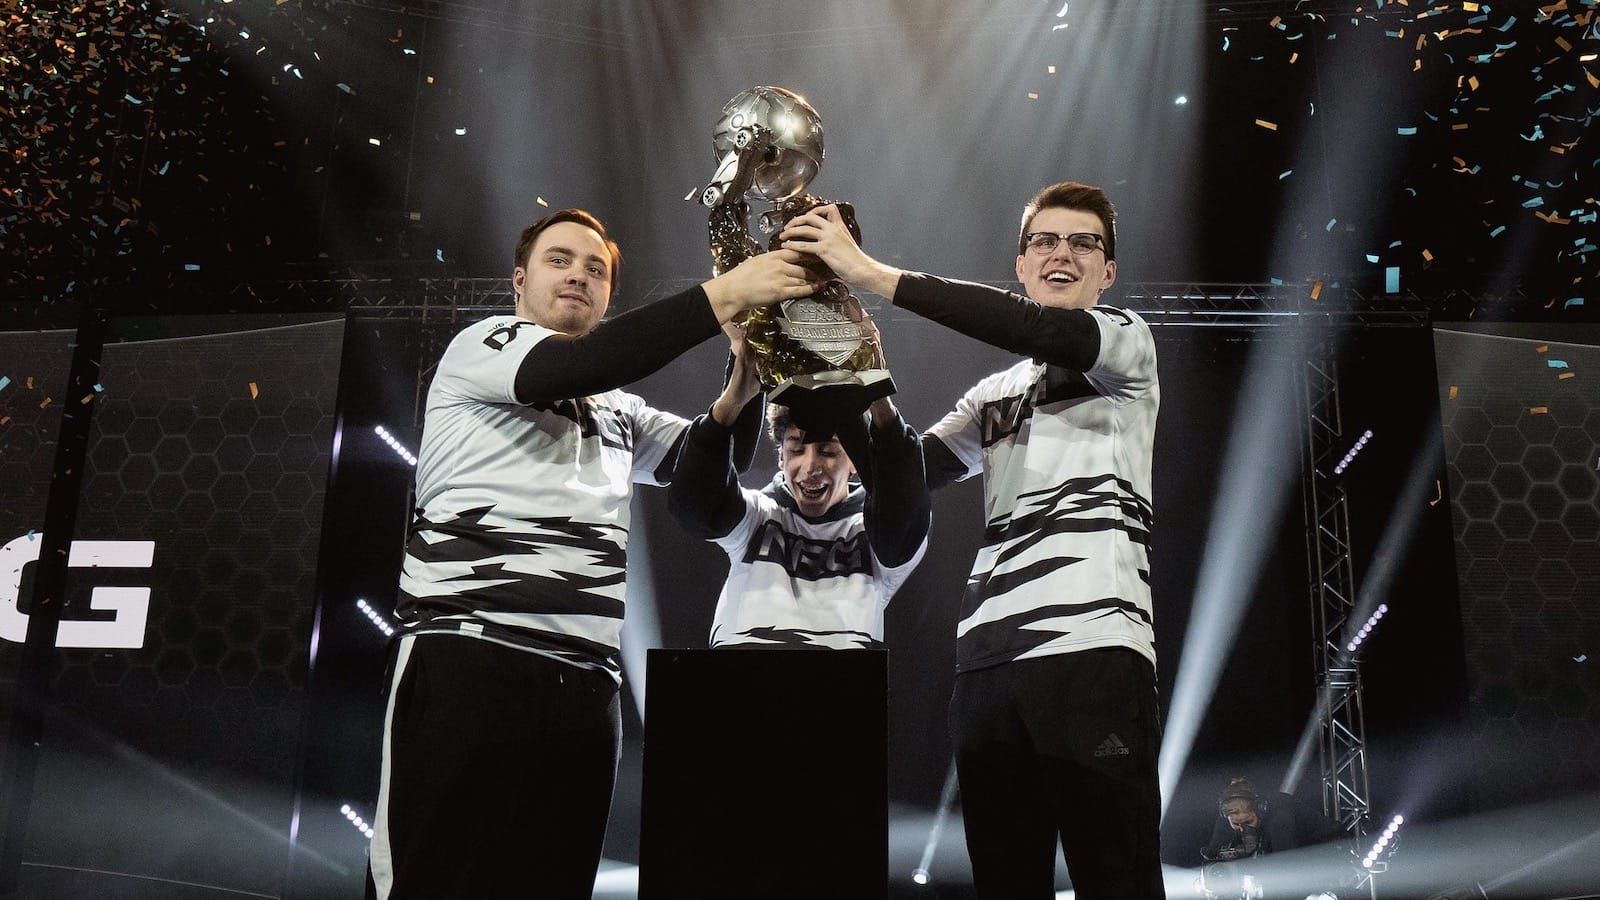 three members of NRG Rocket League team  lift a trophy after winning a championship